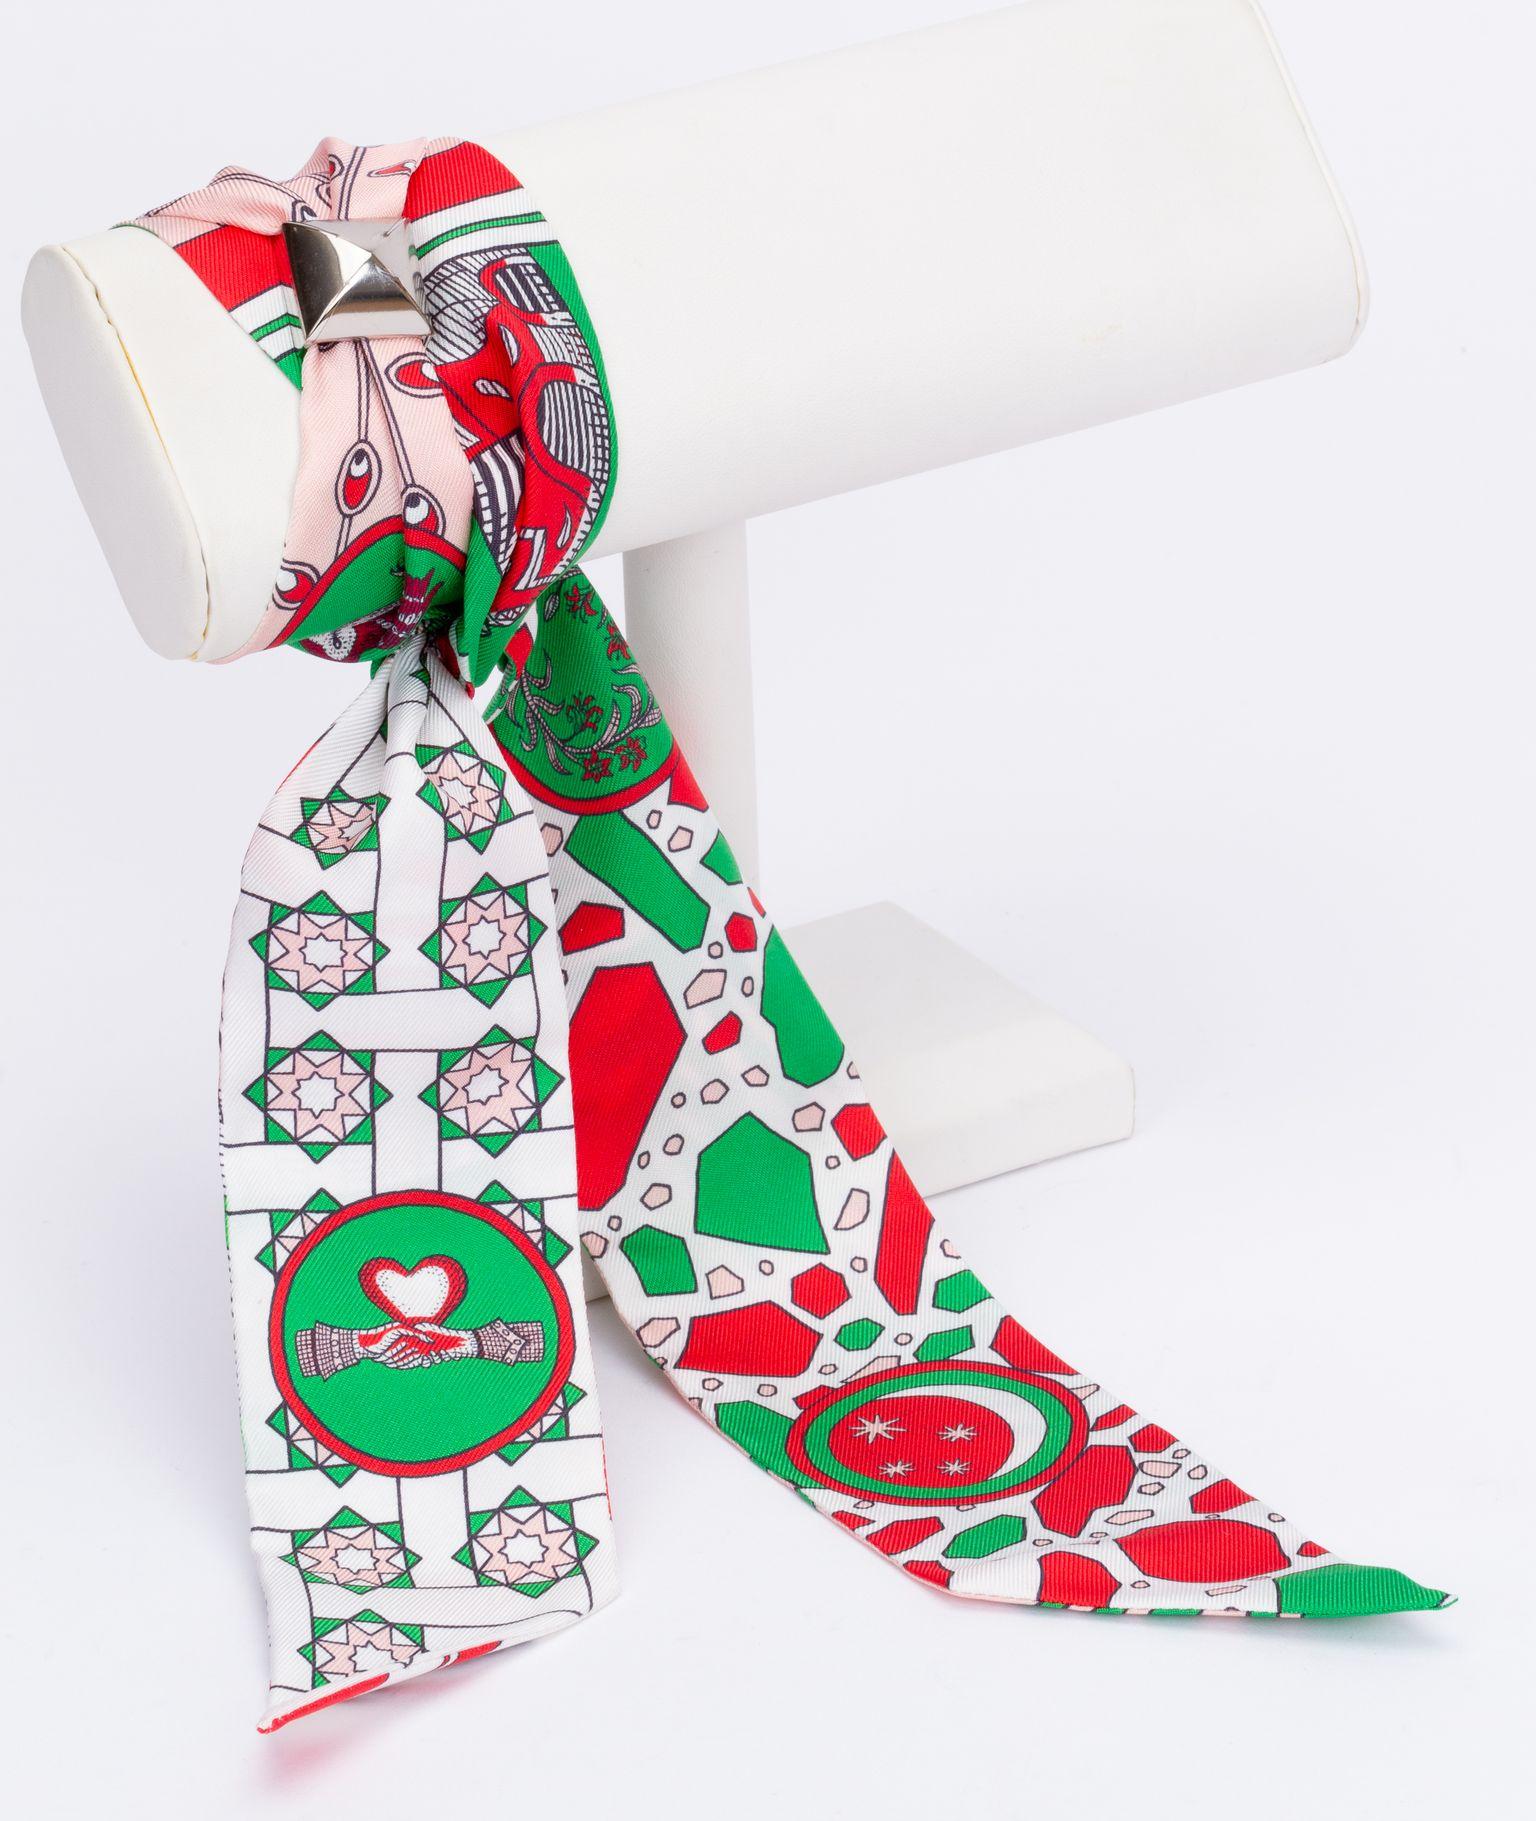 New Hermès La Danse Des Amazones Twilly. The scarf is made out of silk and the main color is pink and green. The print shows animals like an owl. The piece comes with a scarf ring, original box and ribbon.